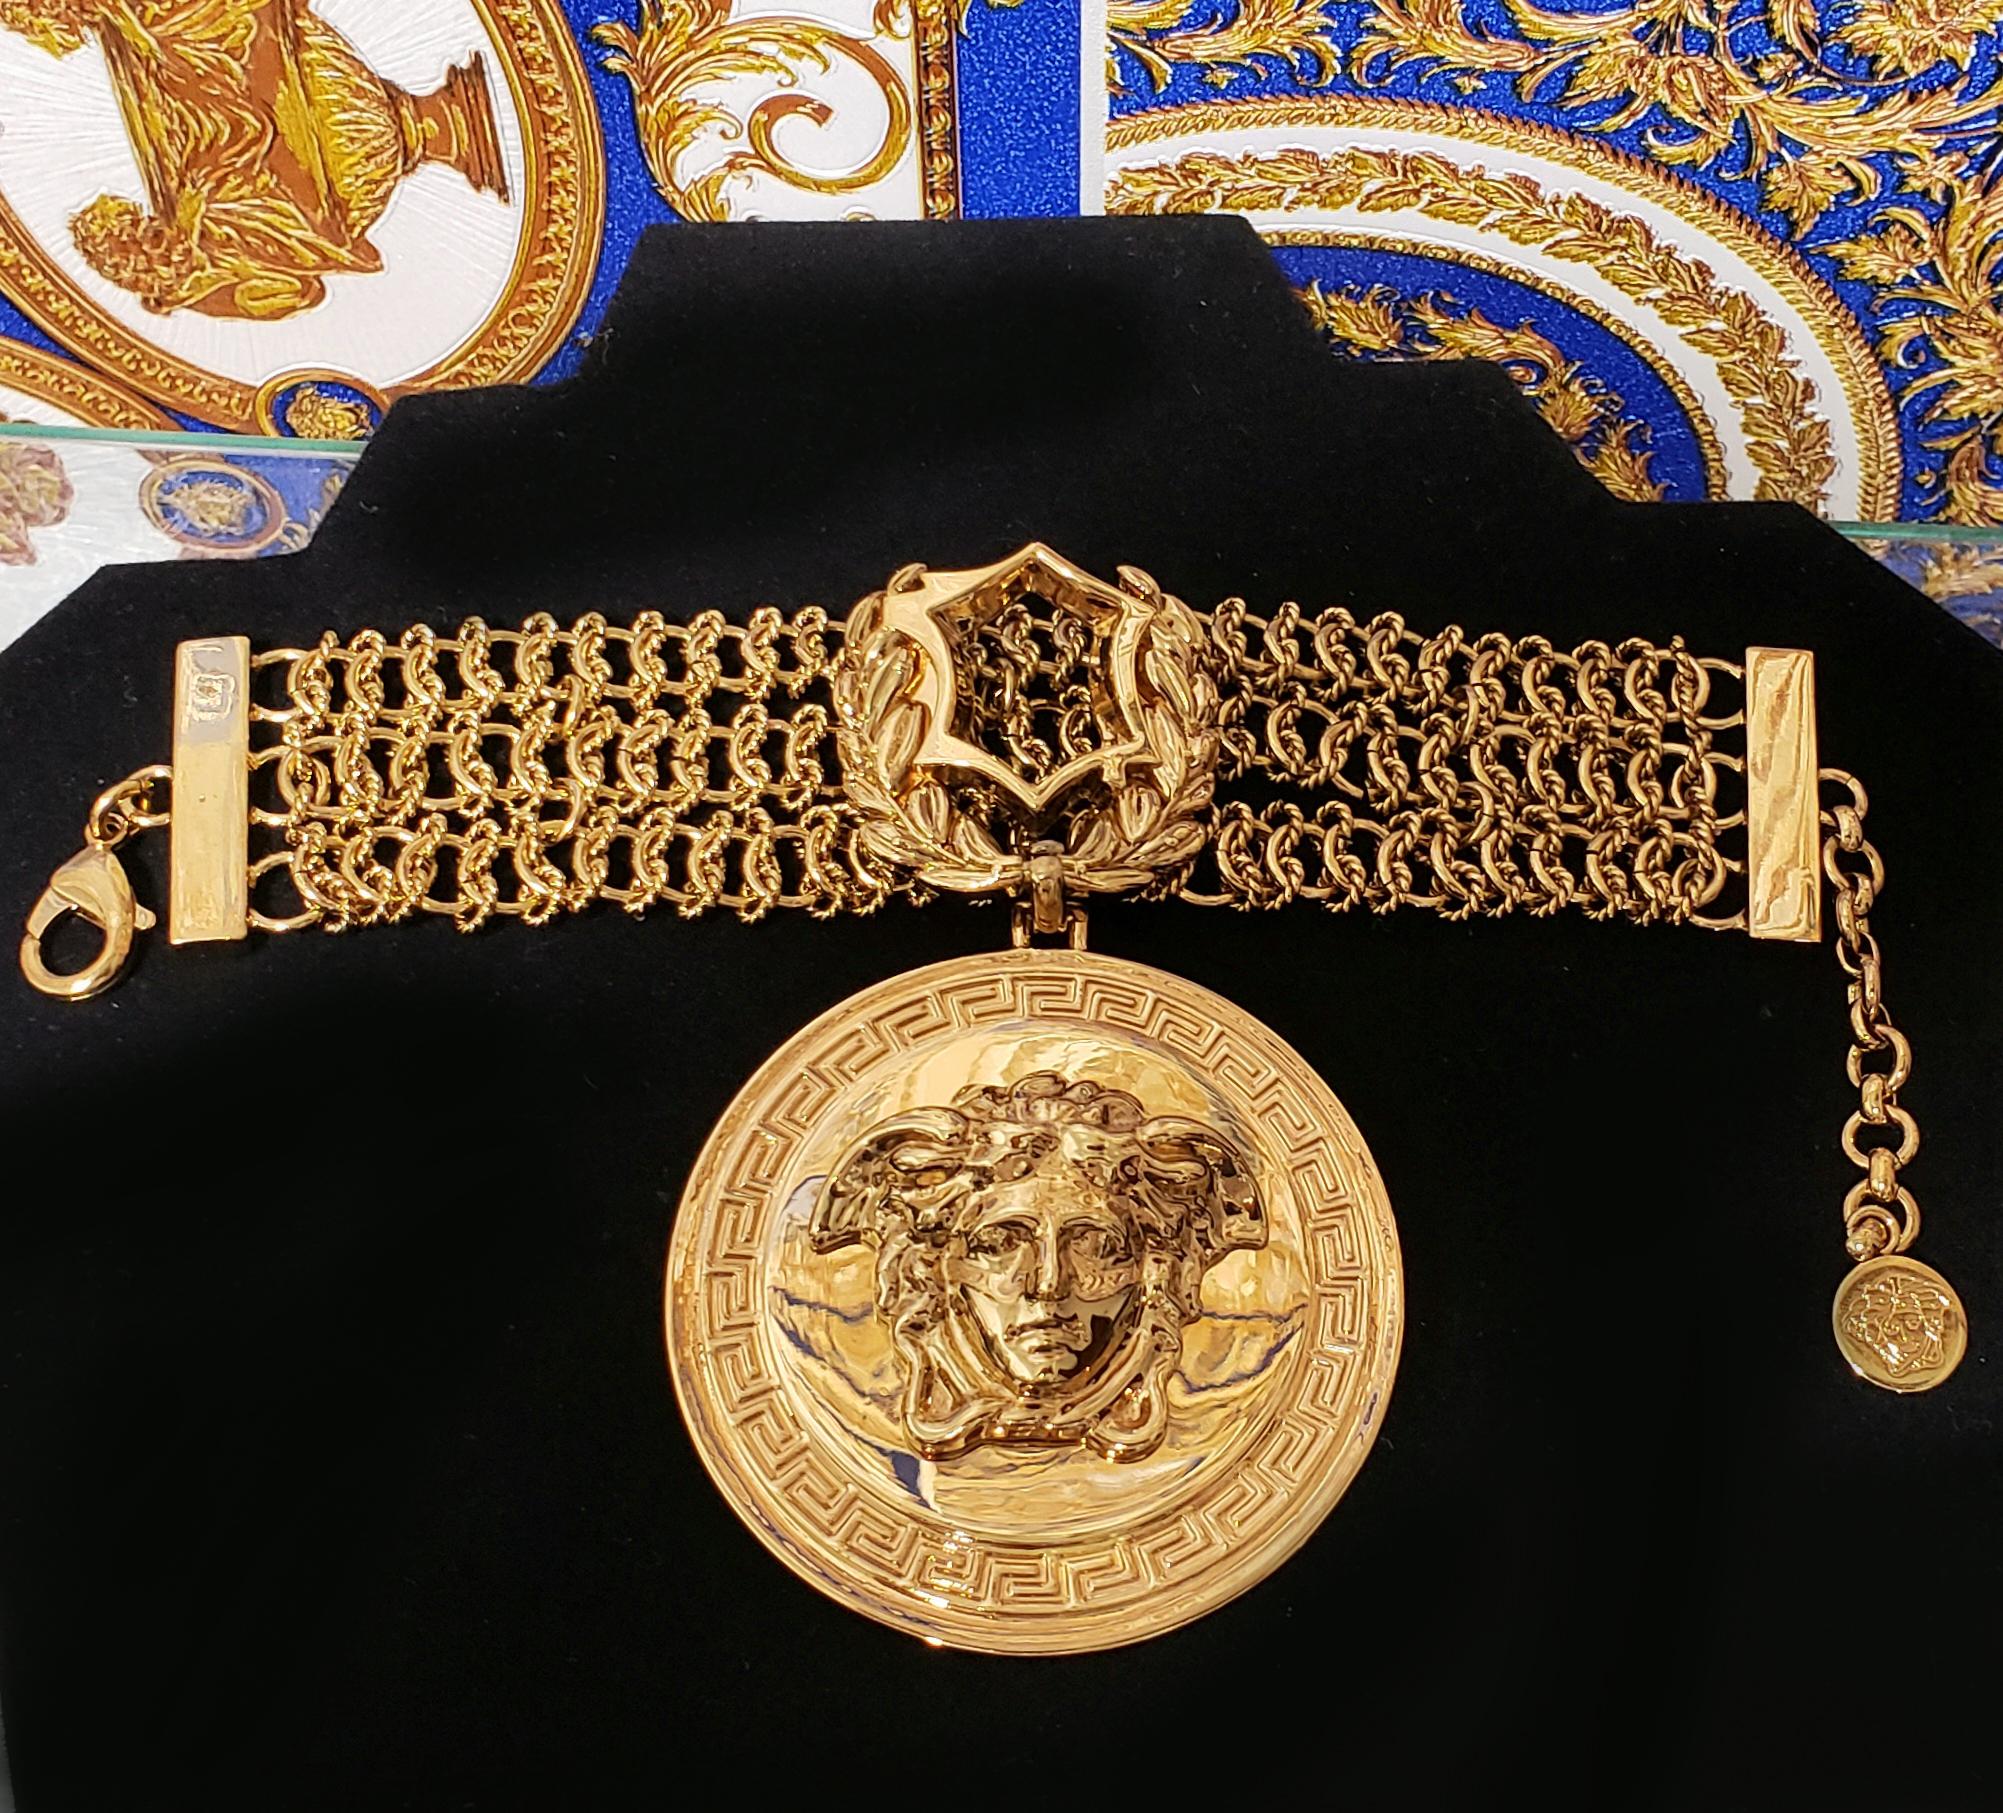 F/W 2014 LOOK # 20 EVERYWHERE ICONIC VERSACE GOLD lated CHAIN MEDUSA BRACELET 3